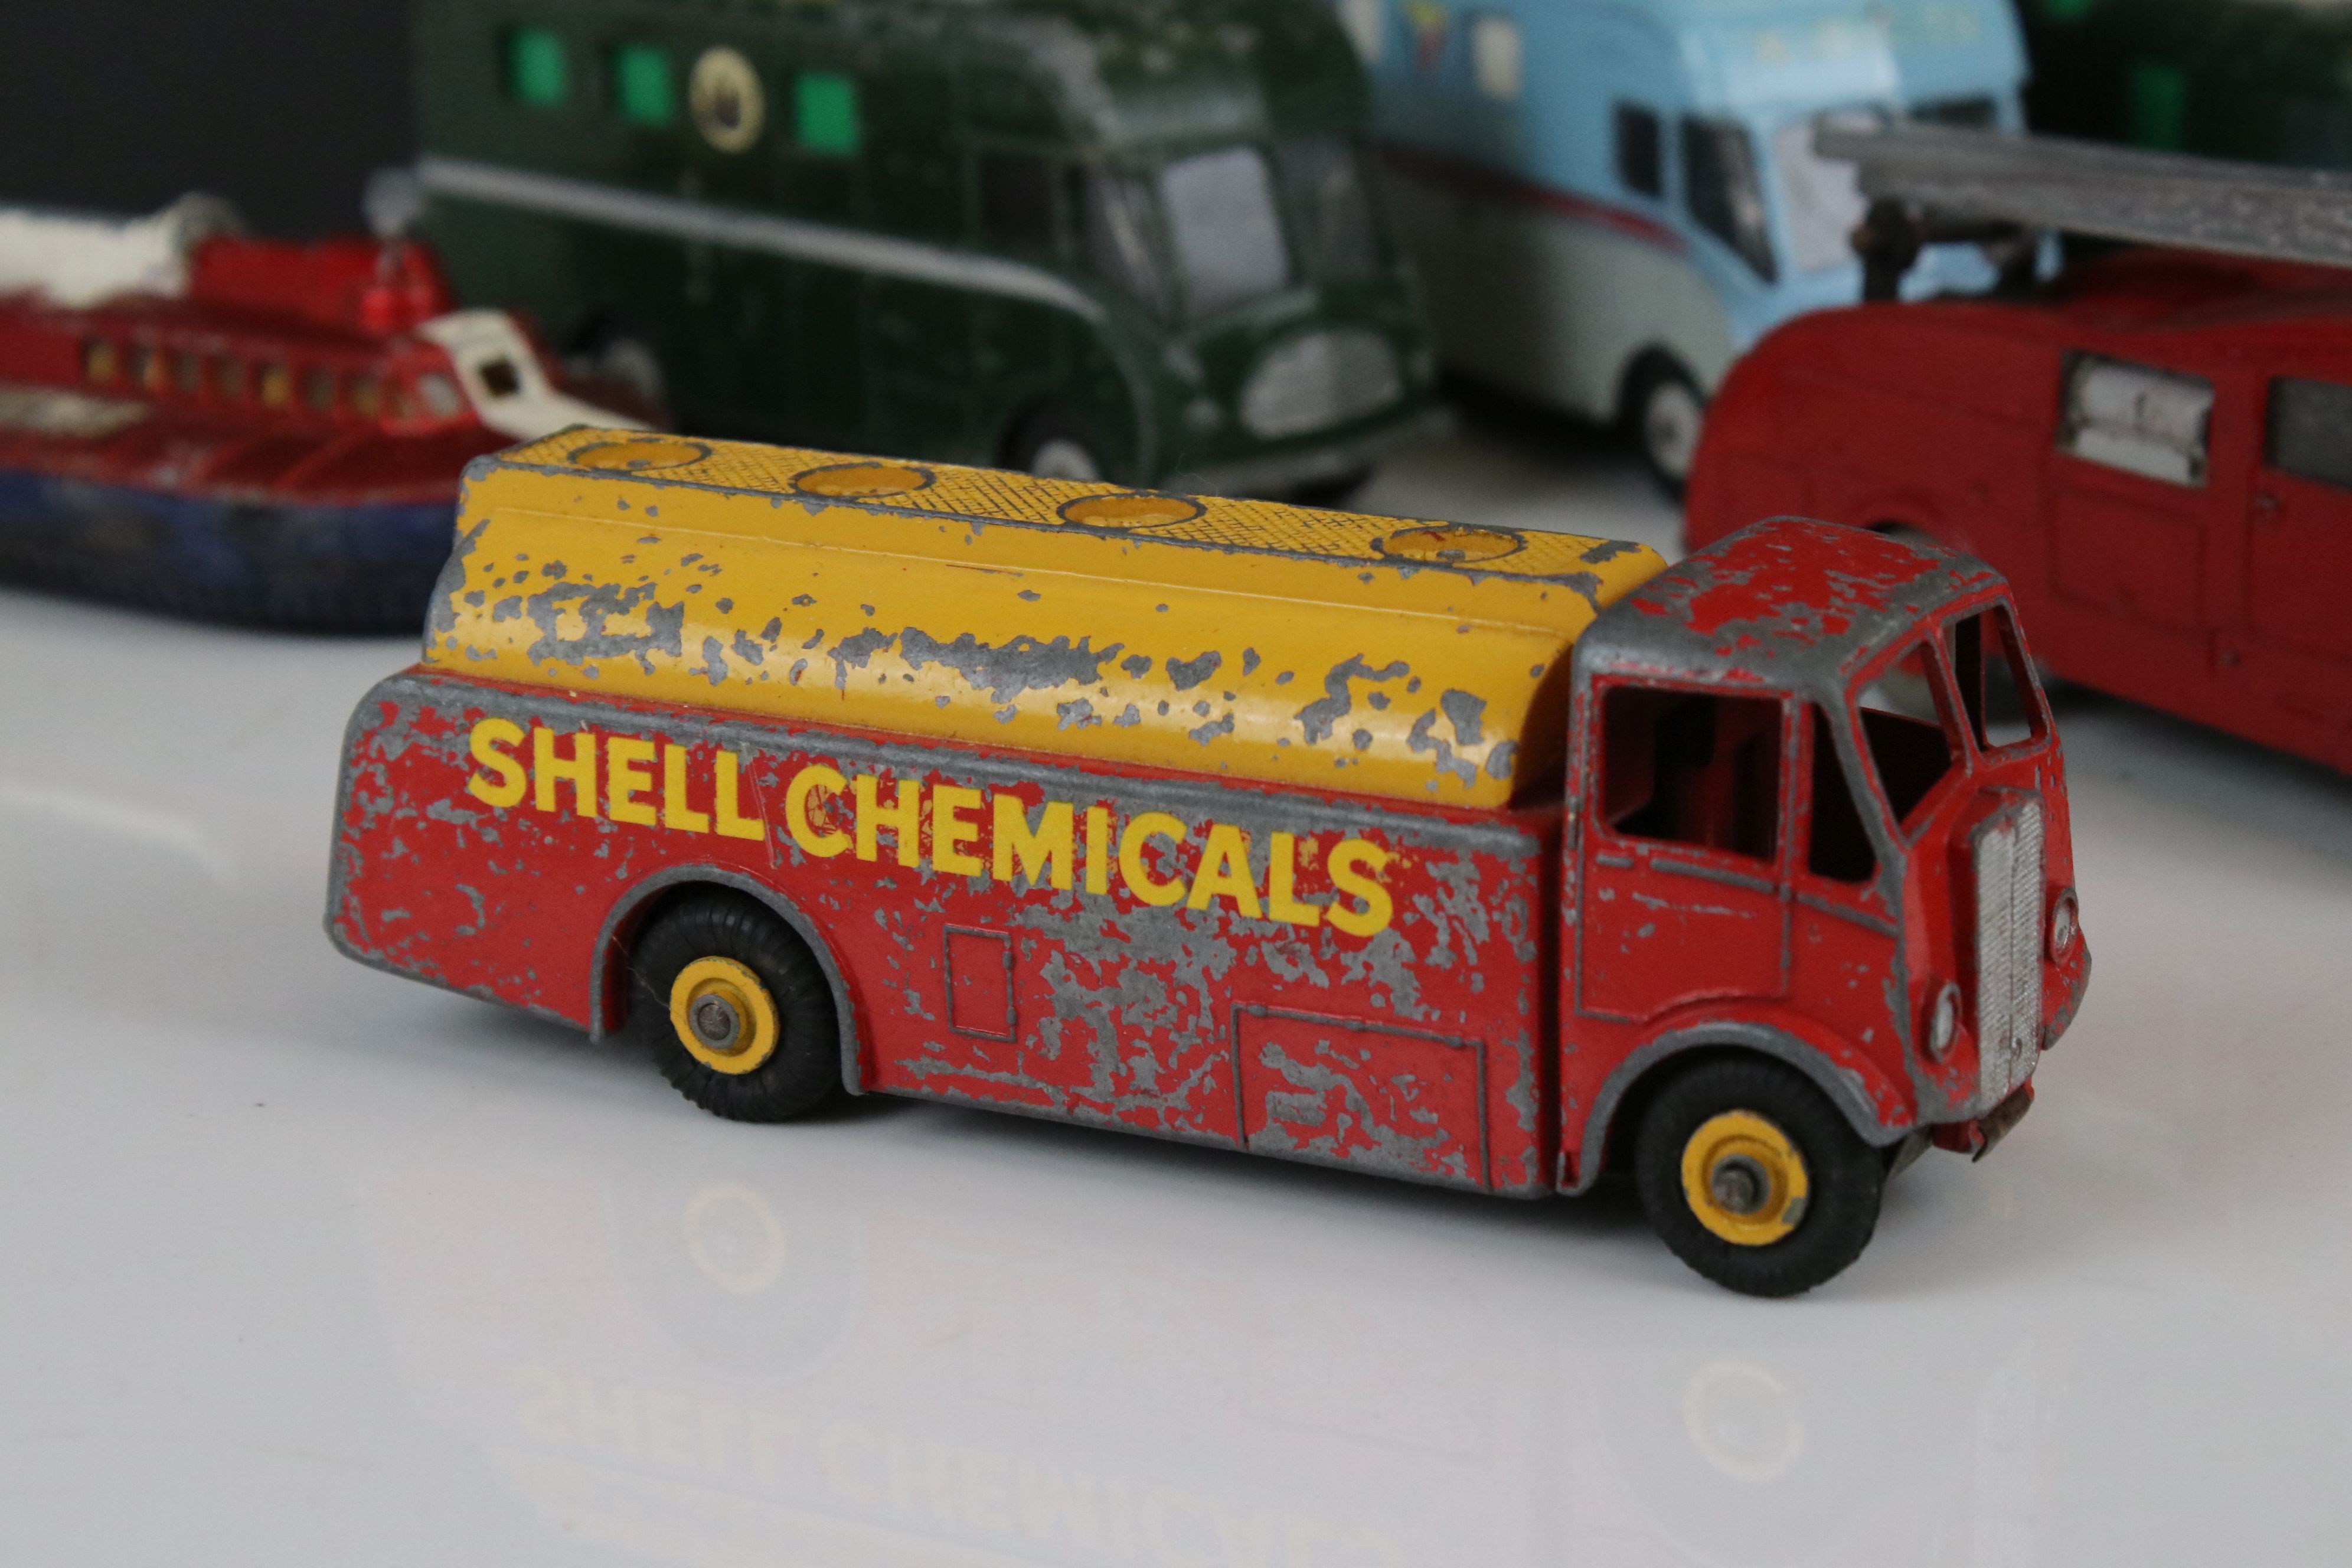 15 play worn mid 20th diecast models to include TV Mobile Control Room, 967 BBC TV Mobile Control - Image 7 of 15